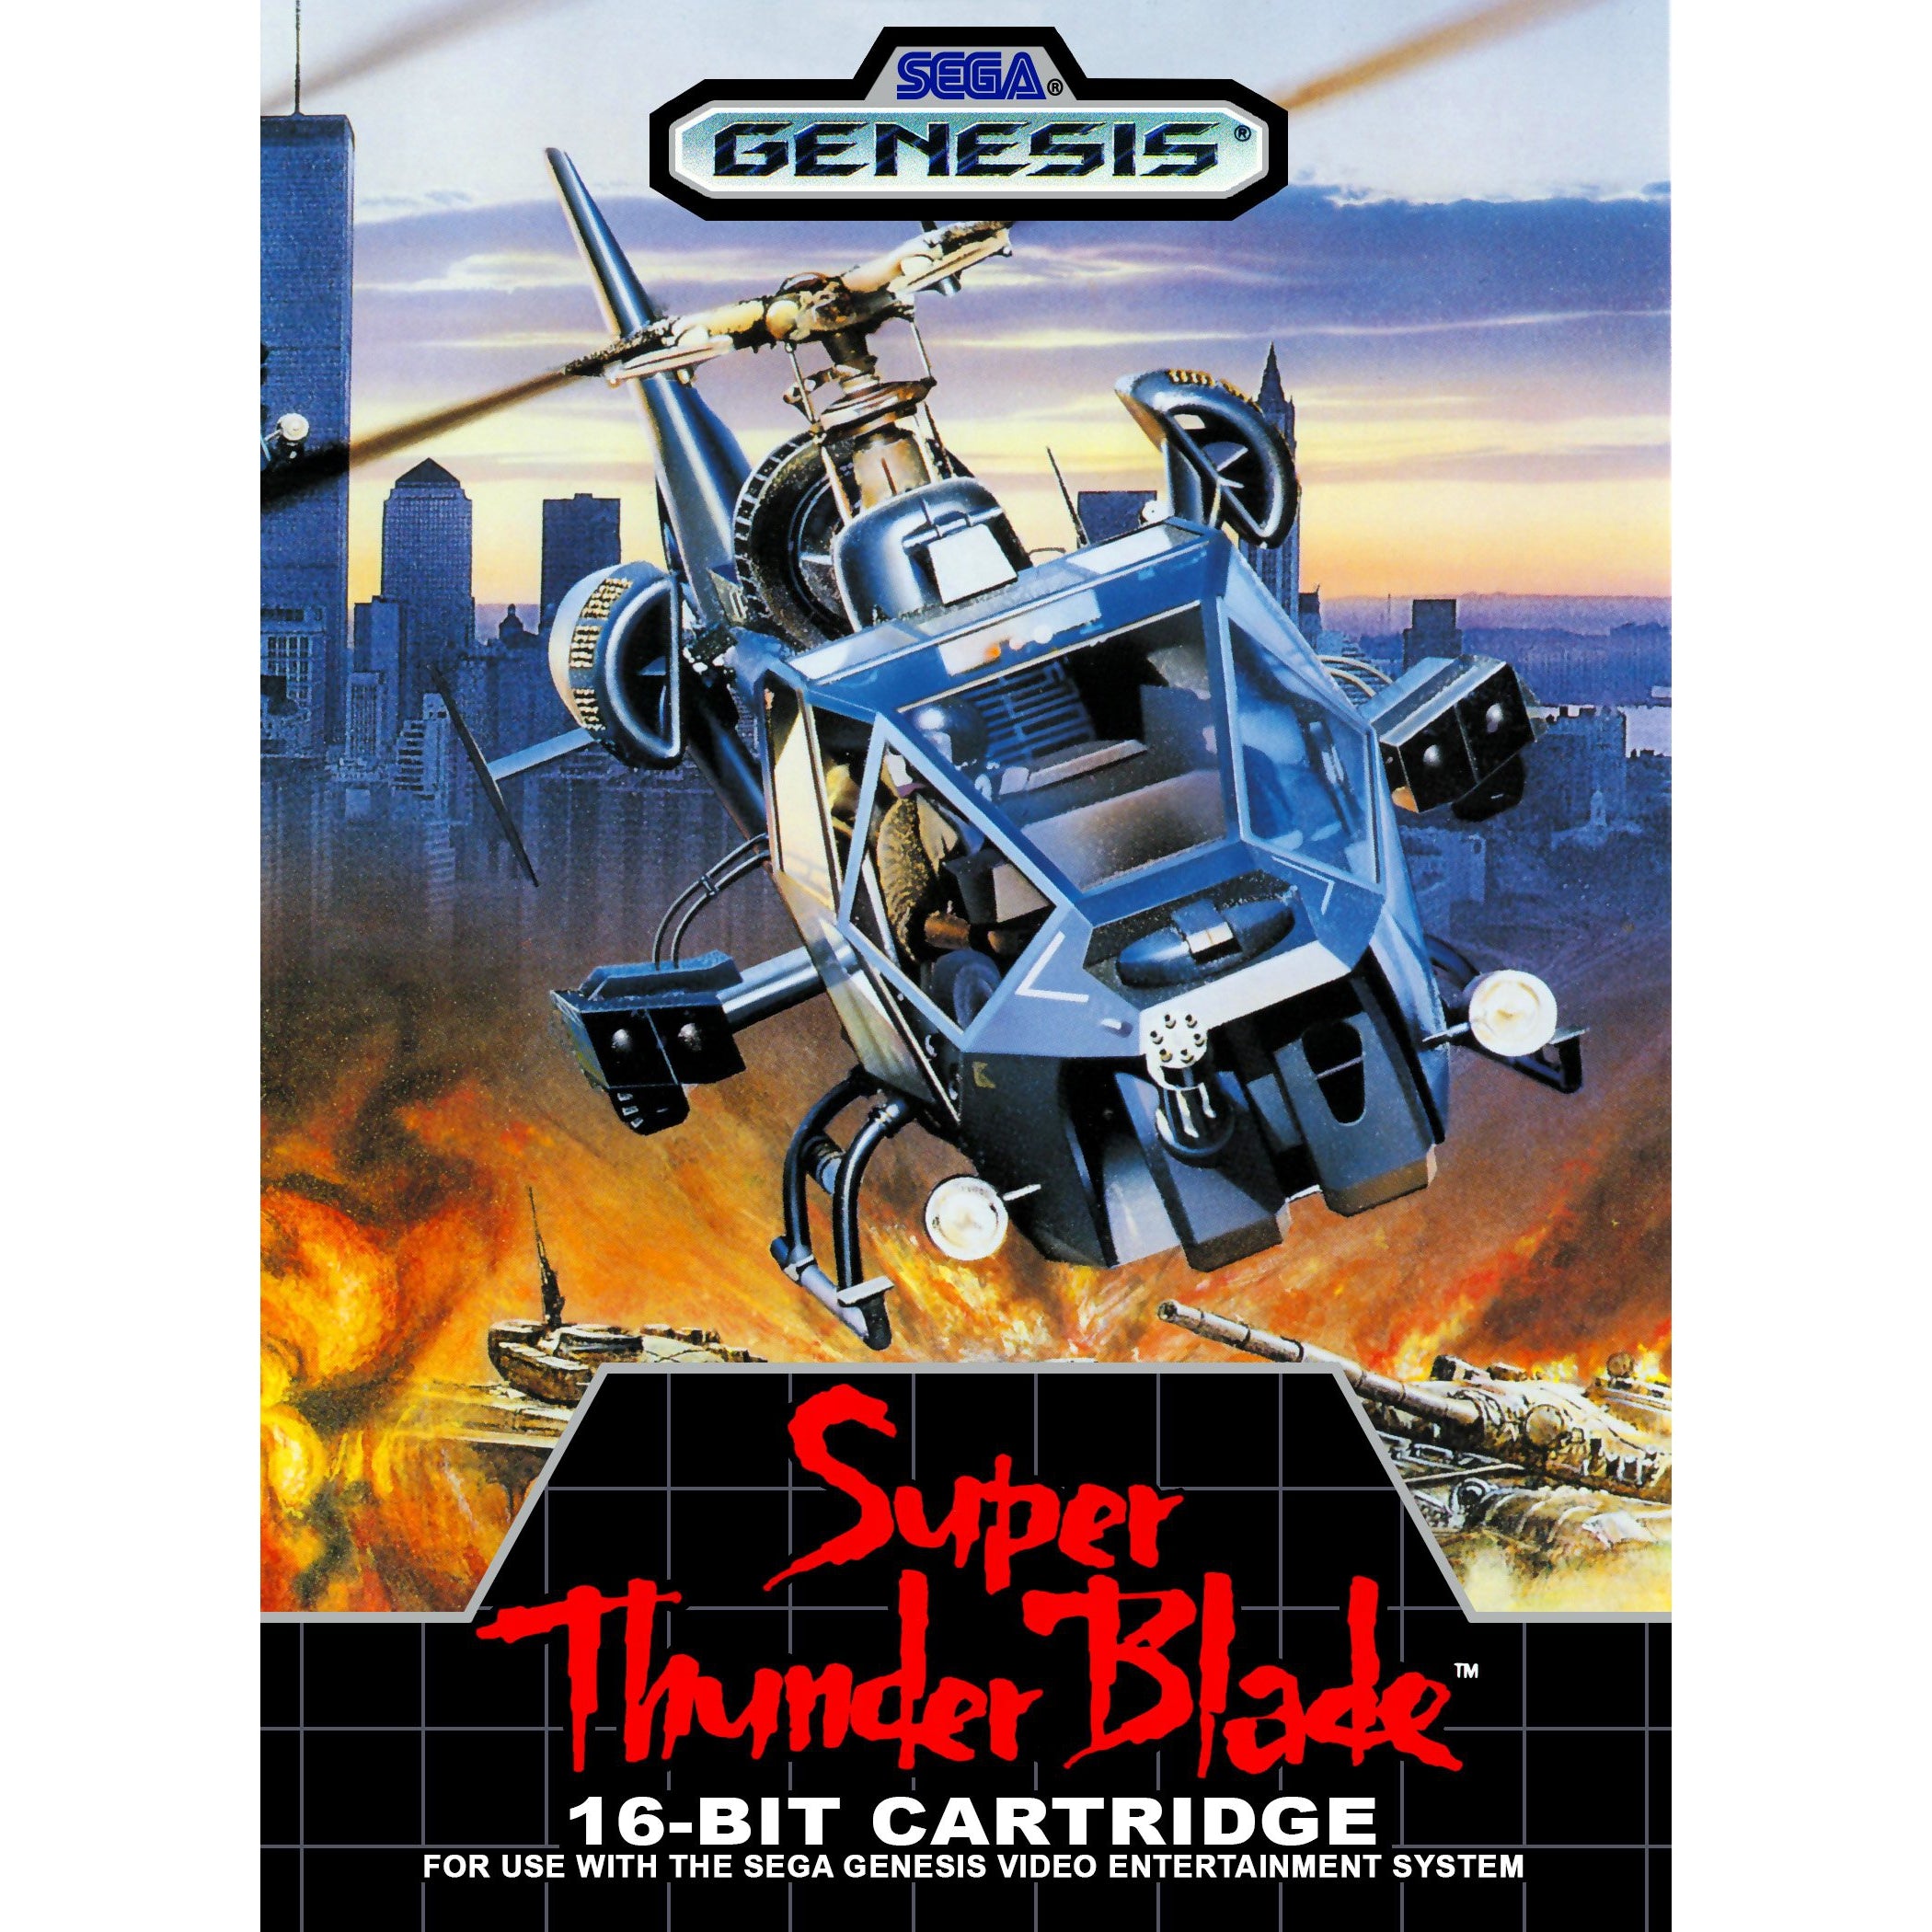 Super Thunder Blade - Sega Genesis Game Complete - YourGamingShop.com - Buy, Sell, Trade Video Games Online. 120 Day Warranty. Satisfaction Guaranteed.